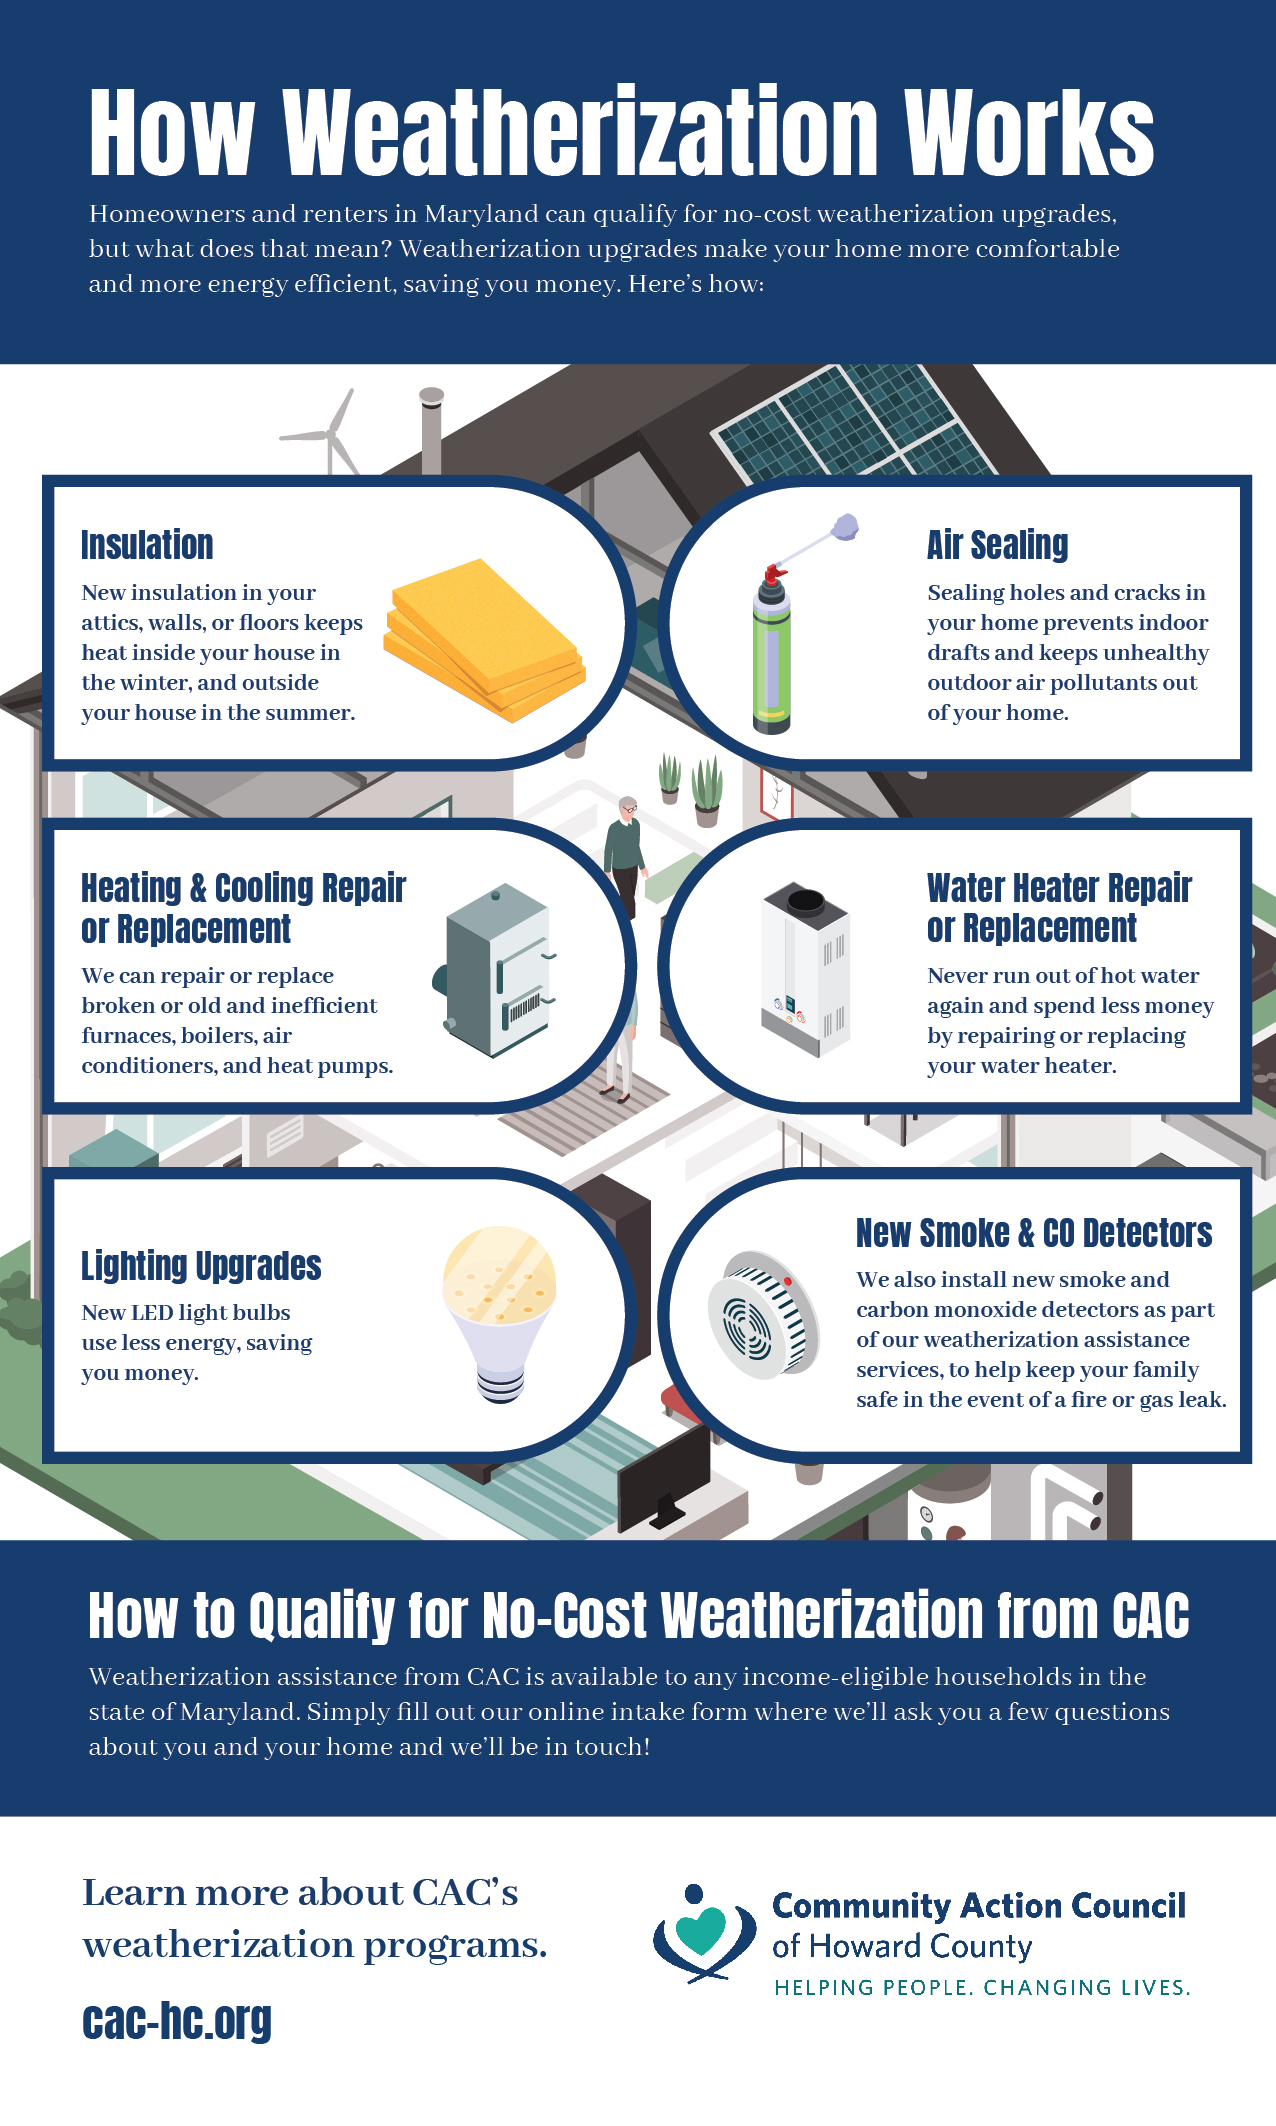 How Weatherization Works infographic